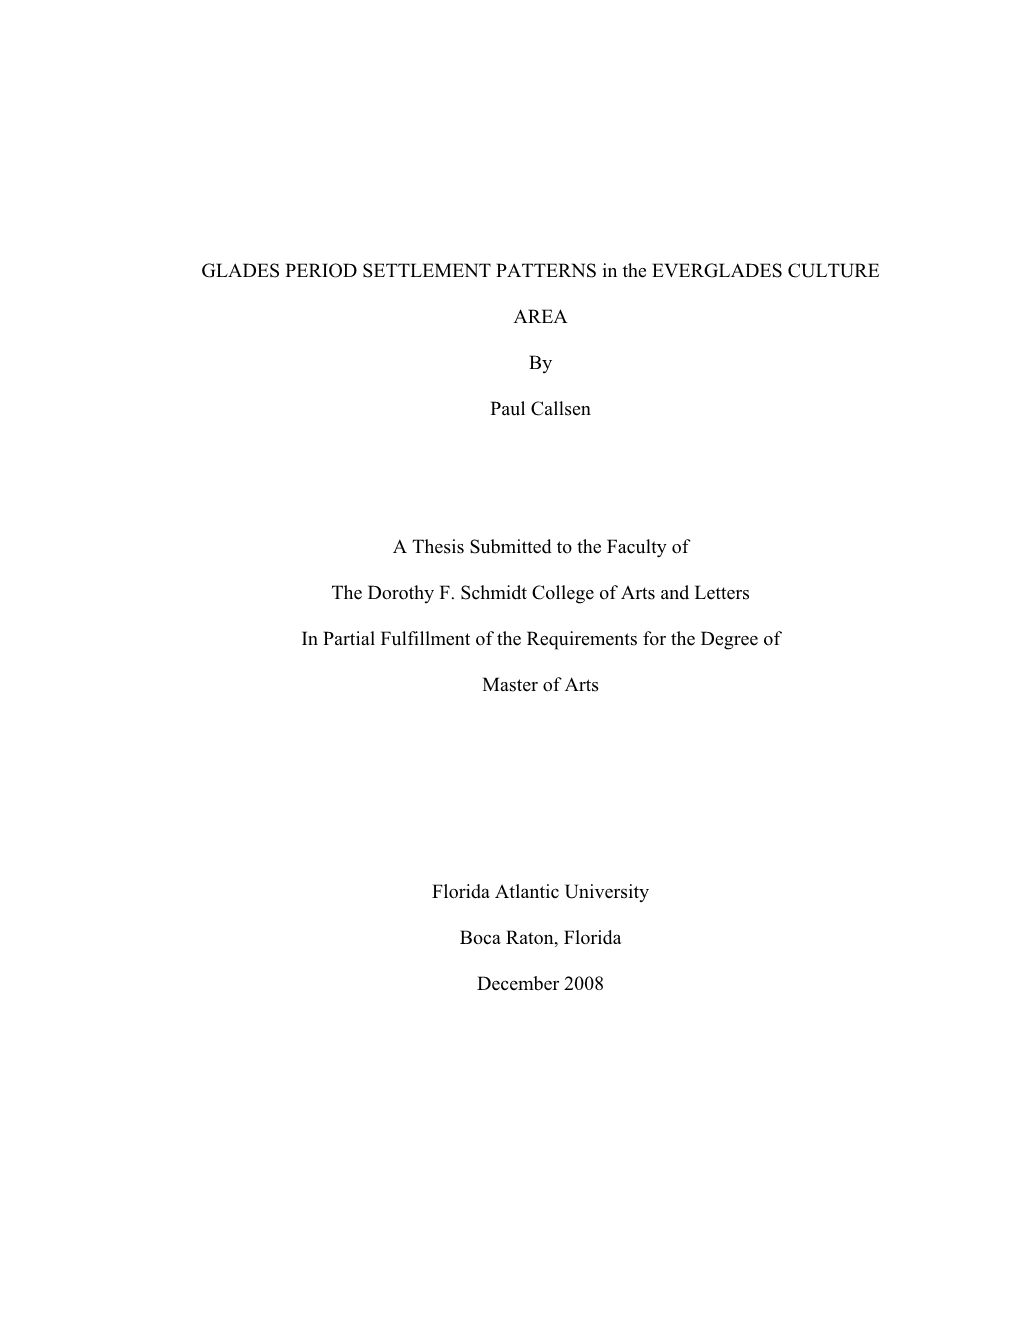 GLADES PERIOD SETTLEMENT PATTERNS in the EVERGLADES CULTURE AREA by Paul Callsen a Thesis Submitted to the Faculty of the Doro